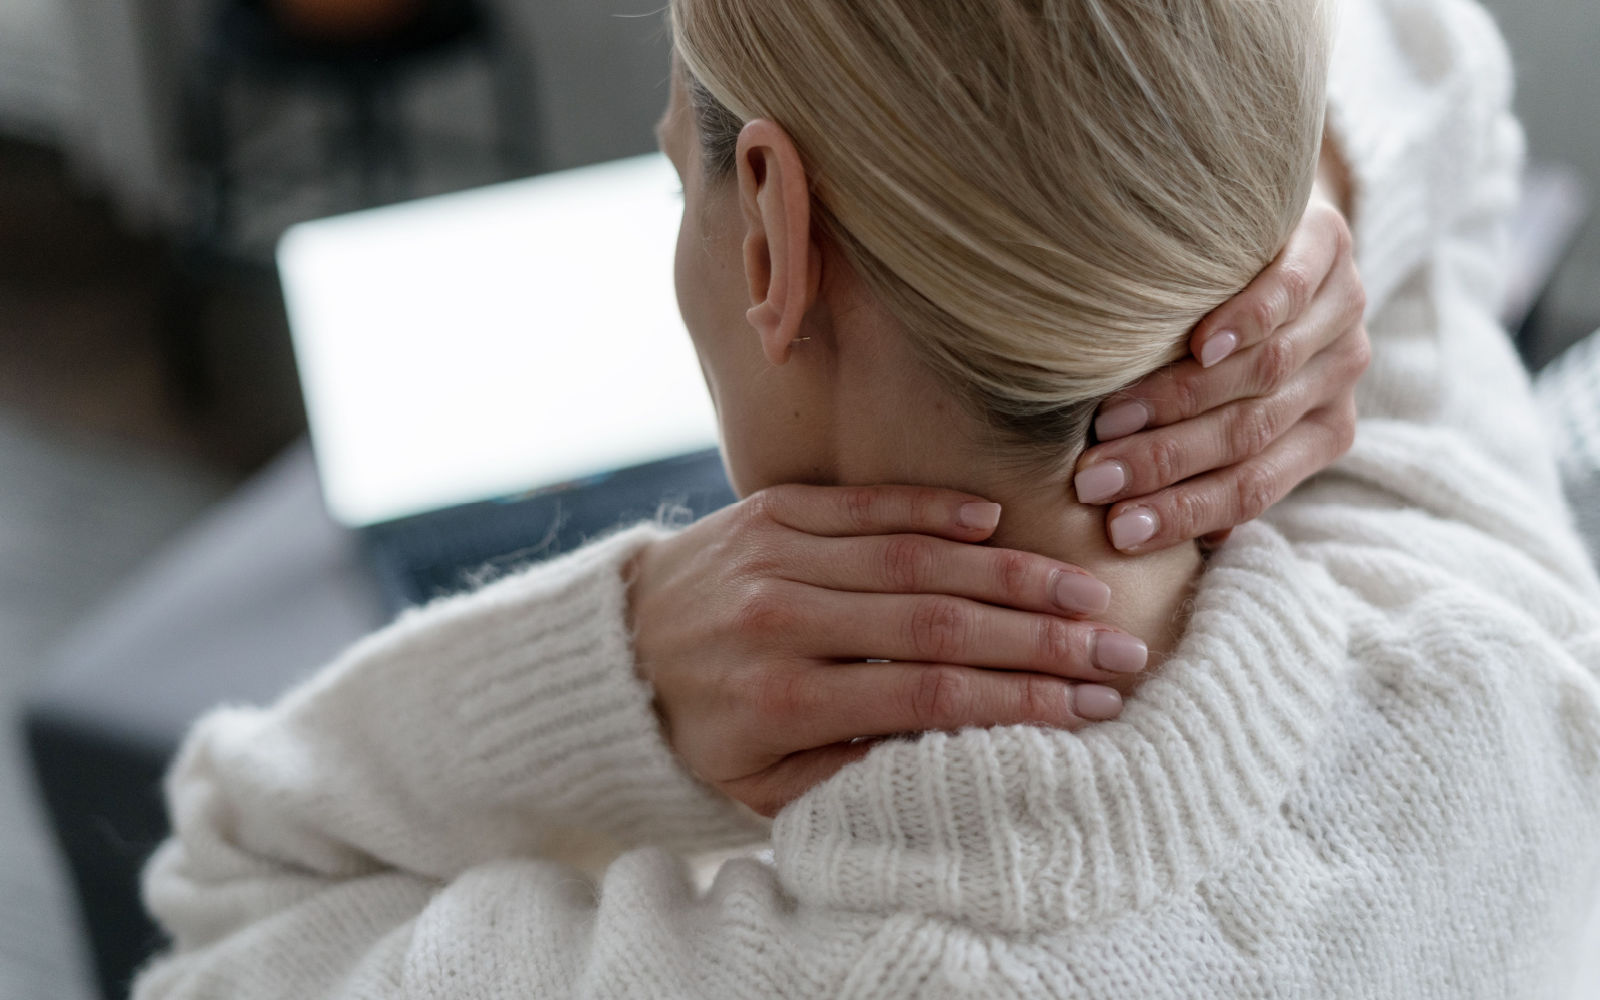 Woman Experiencing a Pinched Nerve Around Neck at Work